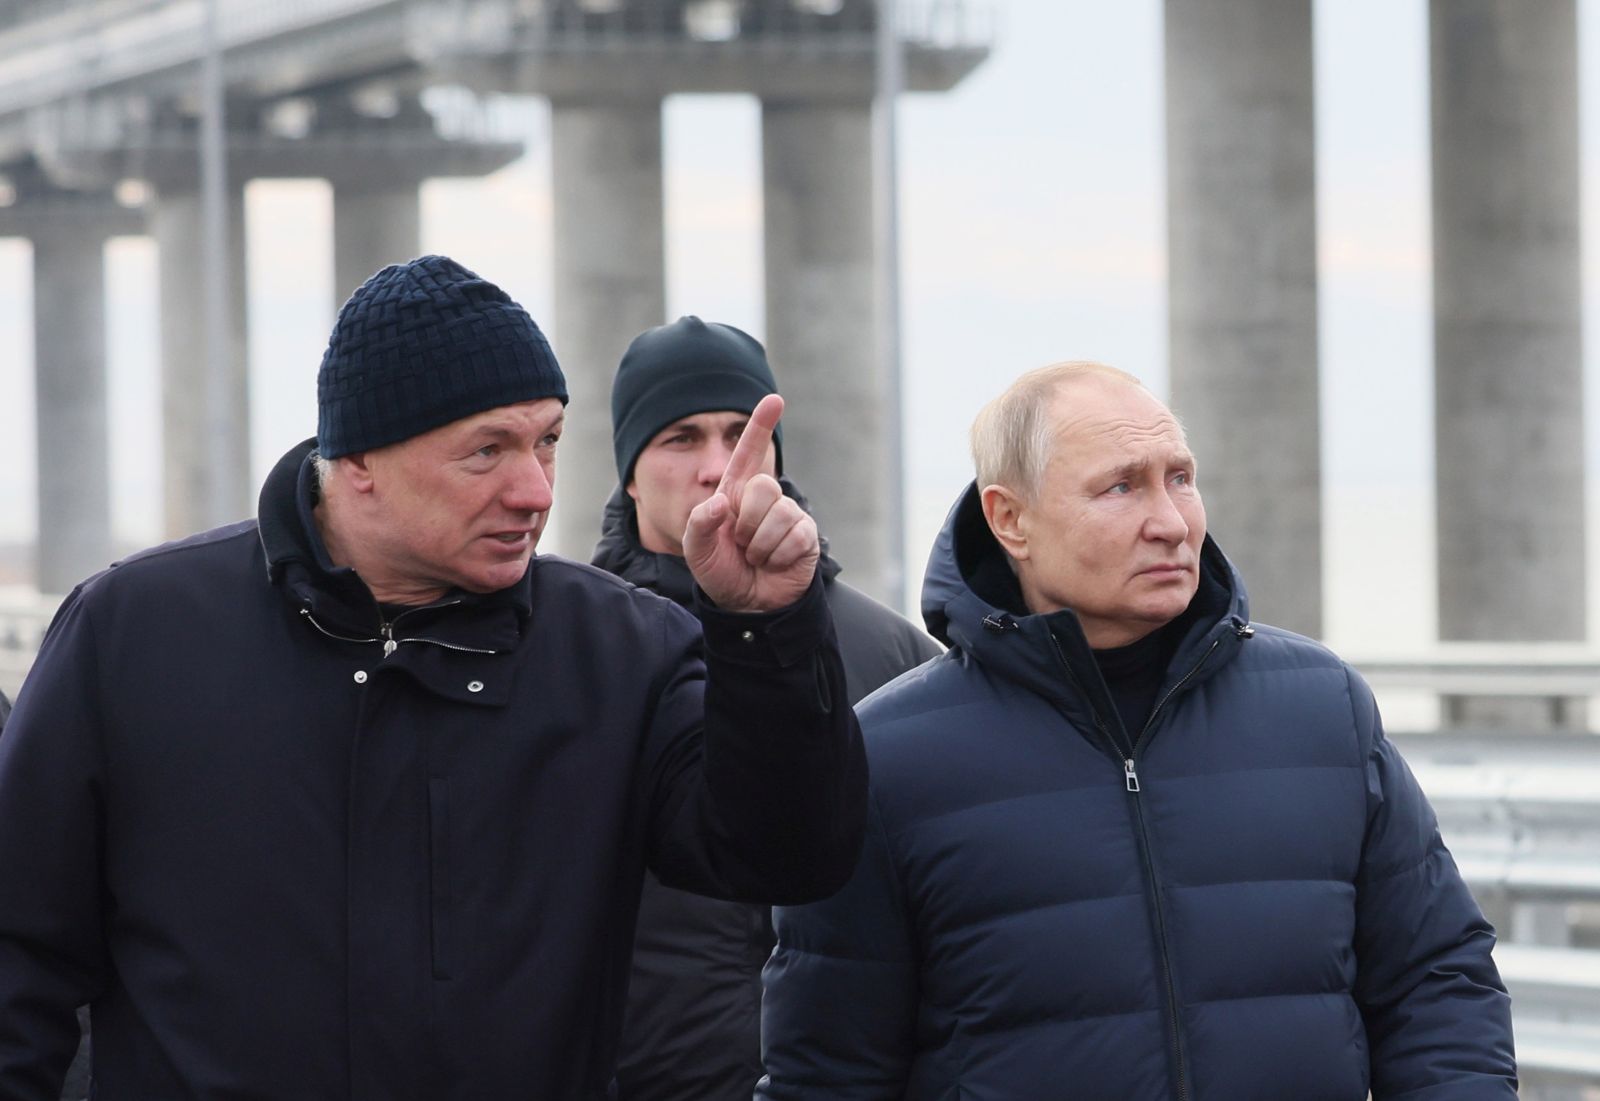 epa10349737 Russian President Vladimir Putin (2-L) and Russian Deputy Prime Minister Marat Khusnullin (L) visit the Kerch Strait Bridge, Crimea, 05 December 2022. The motorway of the Crimean Bridge was repaired after it was damaged by the terrorist attack in October 2022 and opened to traffic on 05 December 2022.  EPA/MIKHAIL METZEL / KREMLIN POOL / SPUTNIK / POOL MANDATORY CREDIT